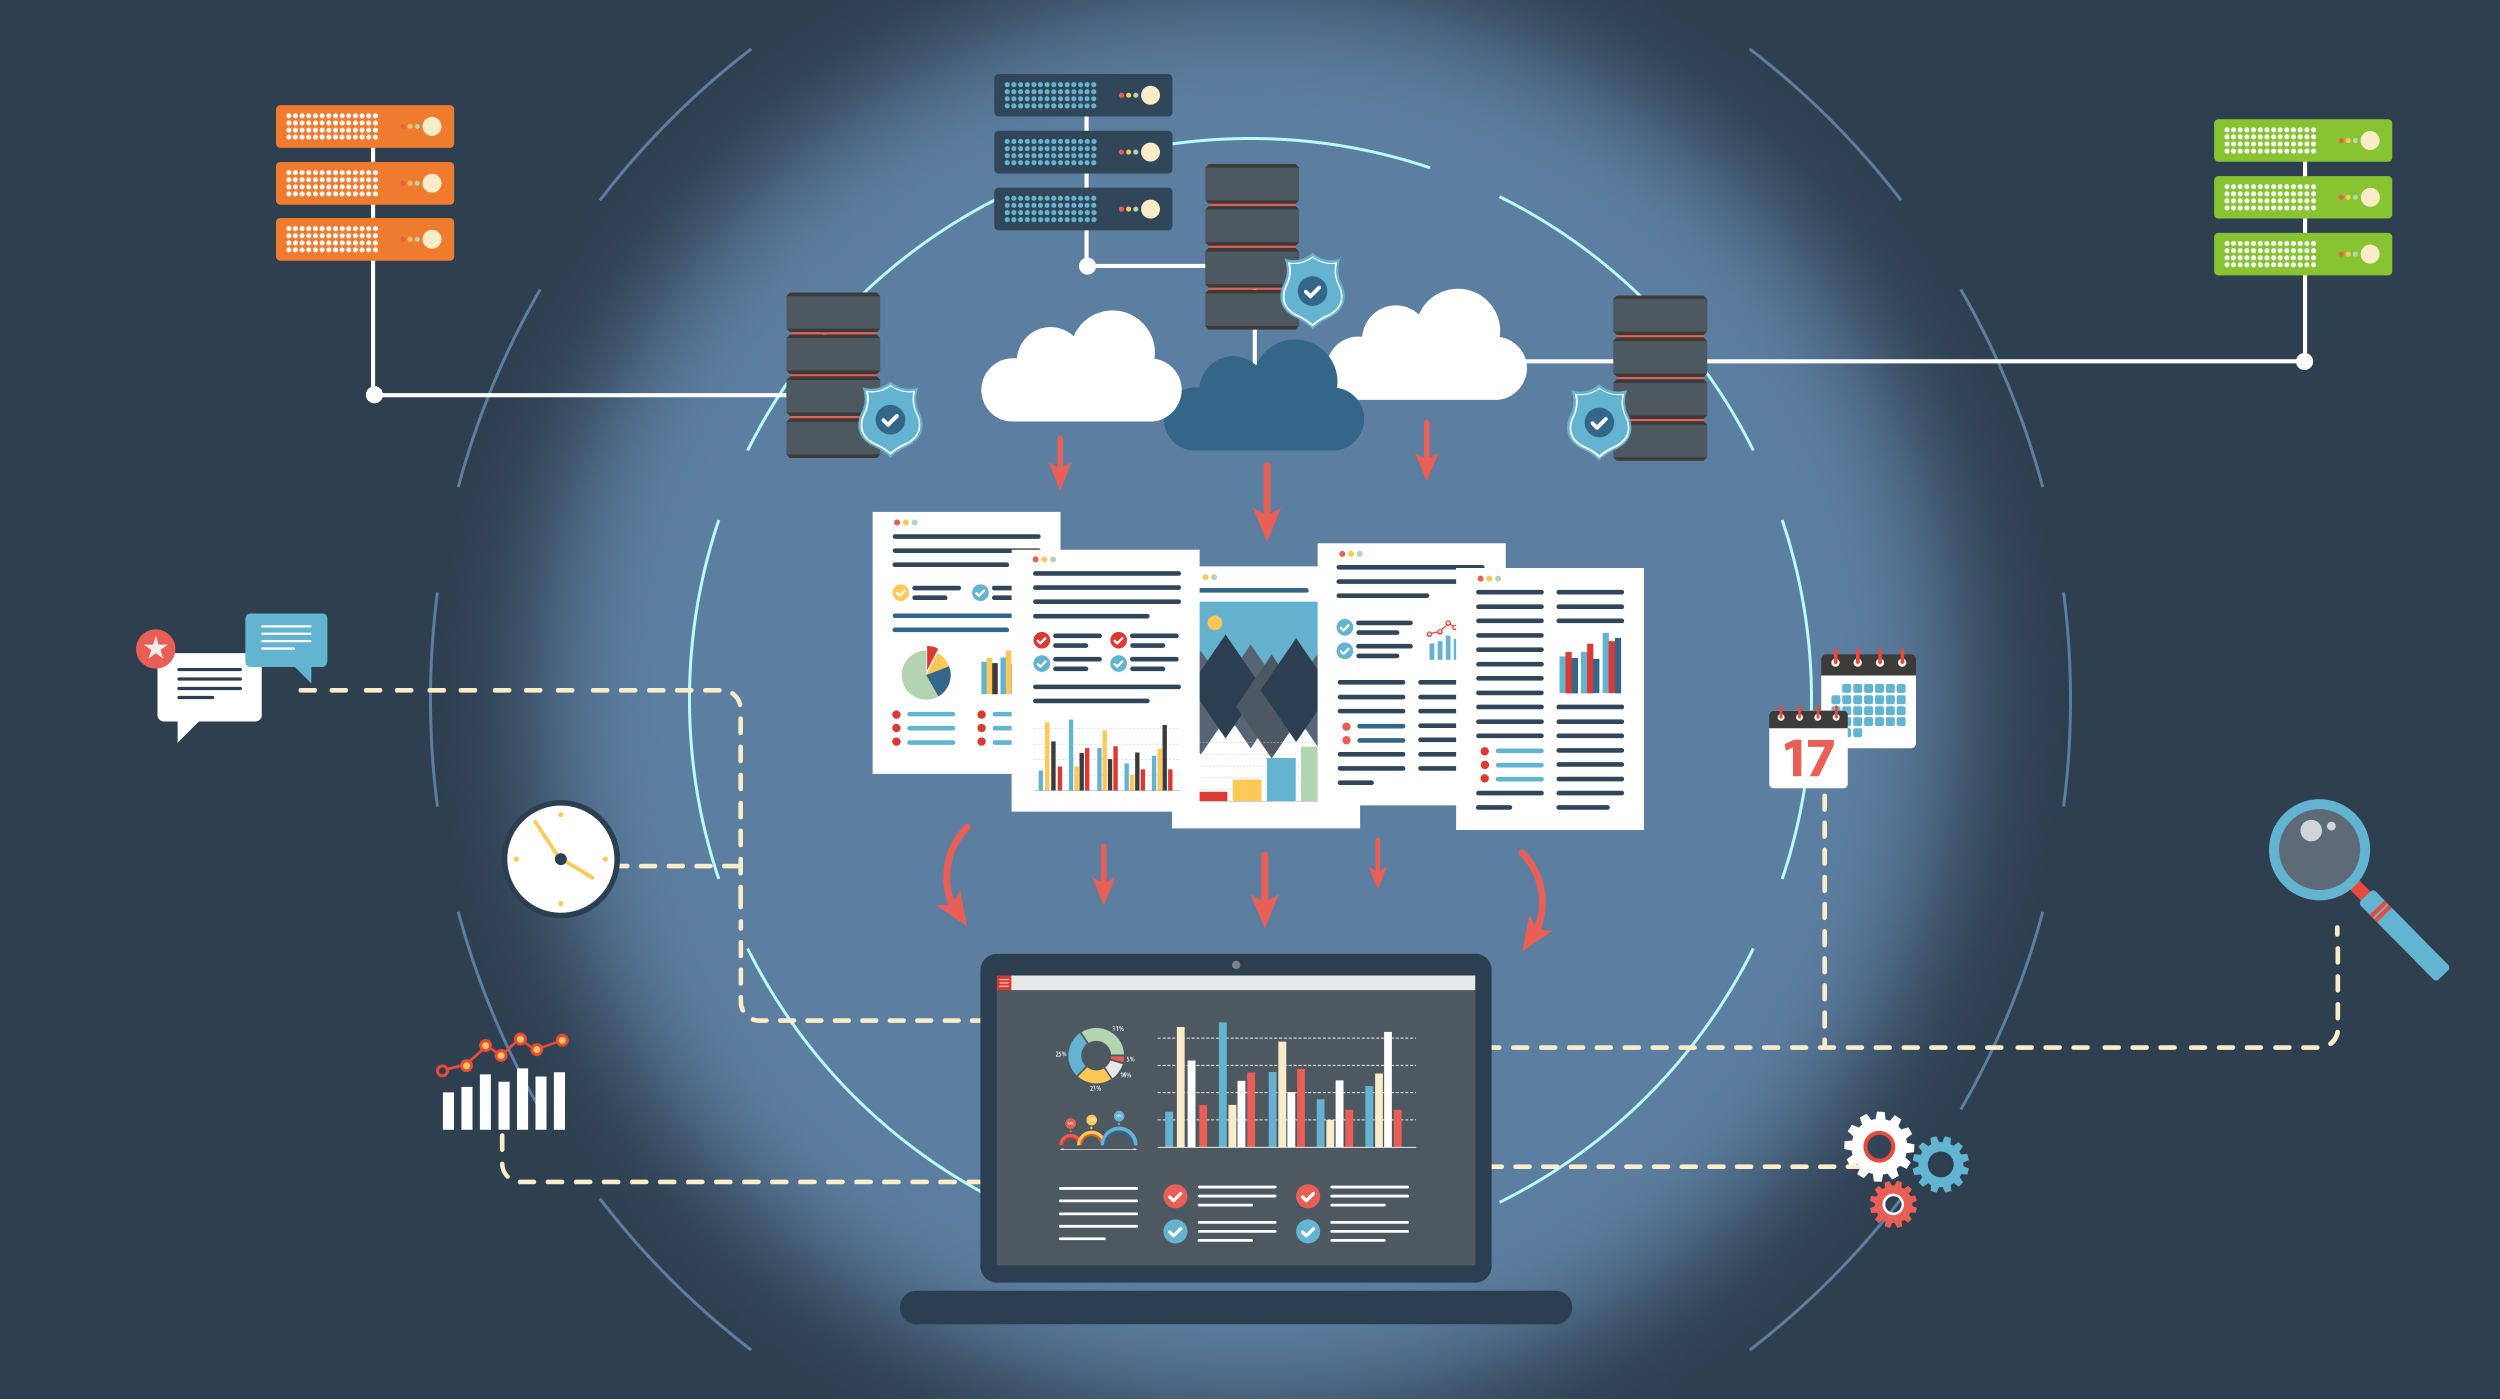 An illustration depicting interconnected clouds symbolizing multi-cloud management, showcasing seamless integration and optimized operations